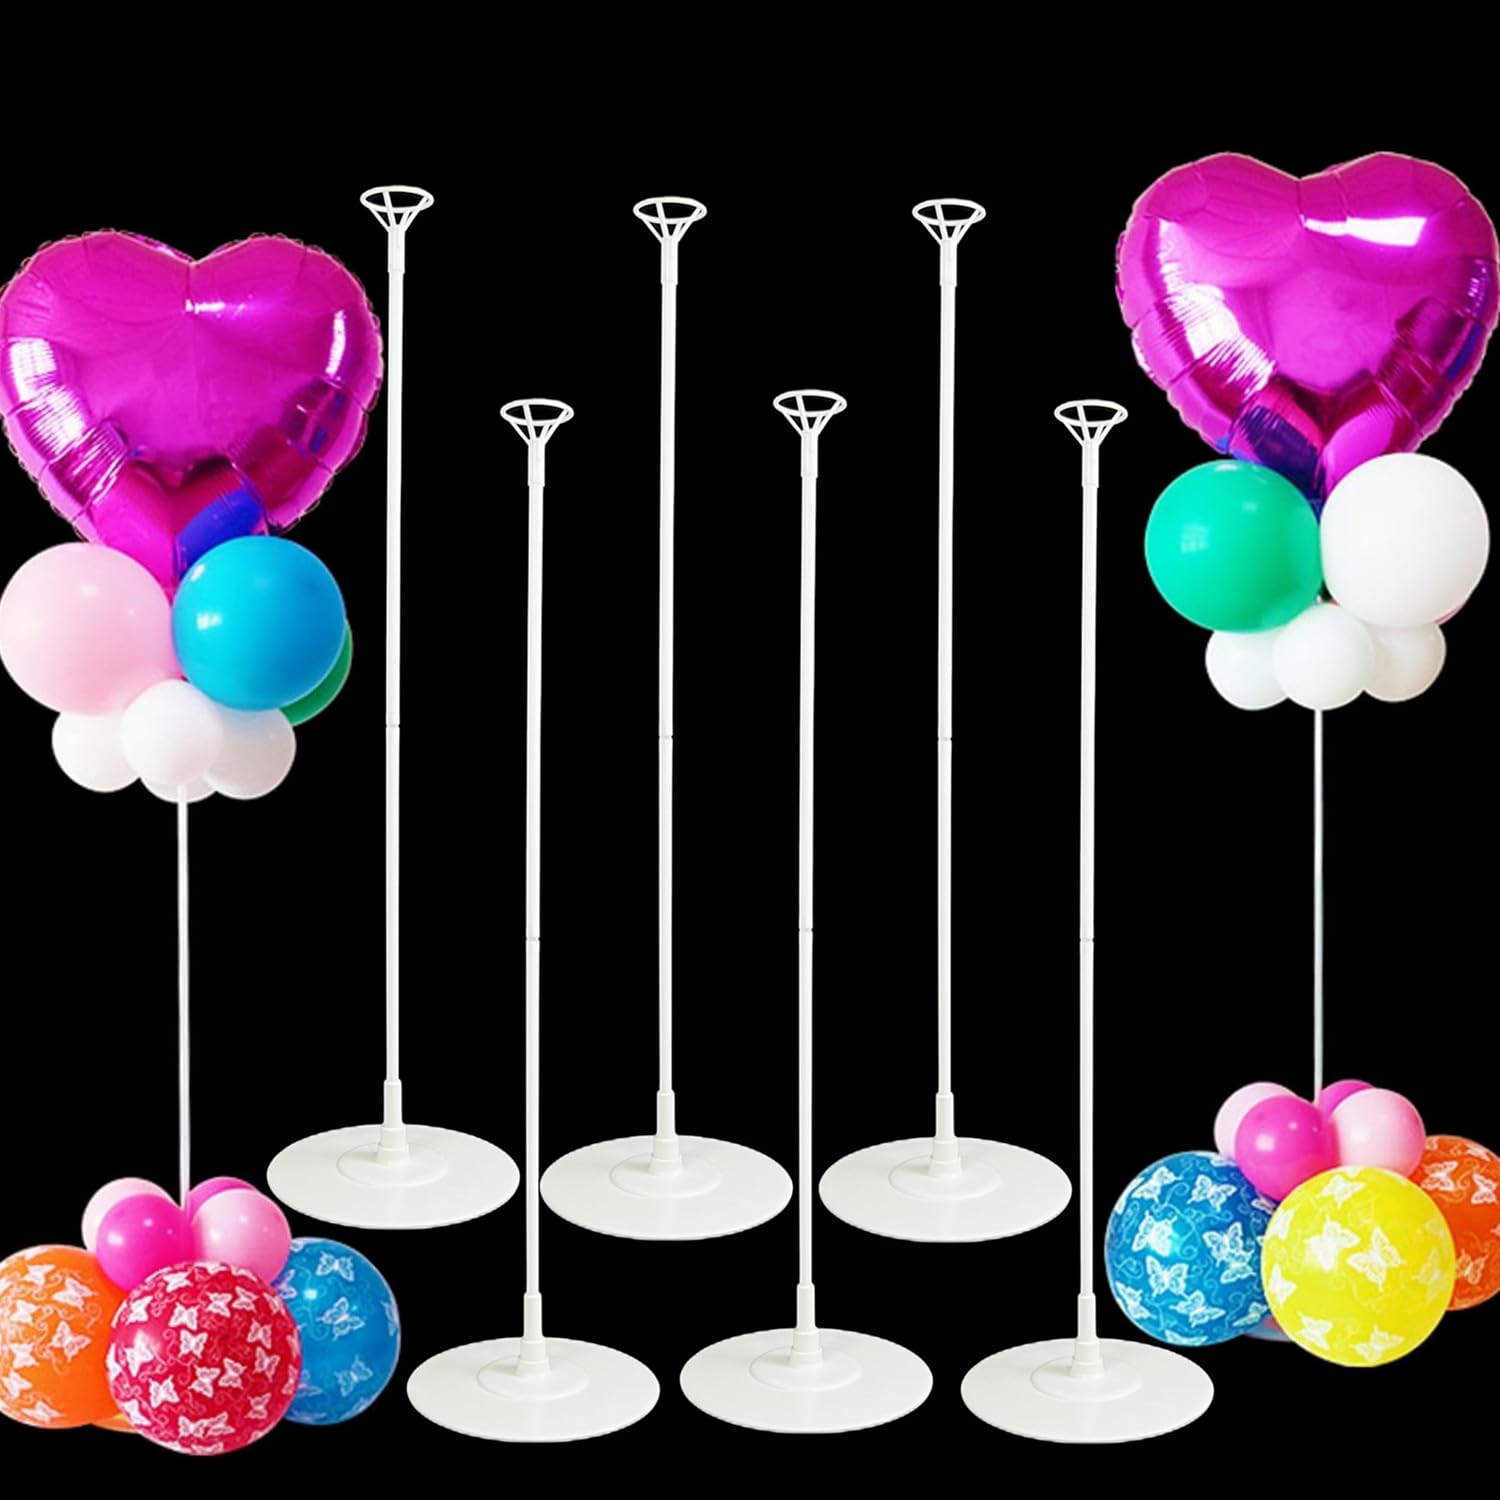 Dilcamrita Balloon Sticks Stands With Cups - 6 Sets 28" Tall Balloon Column Stands Kits with Base for Table Top / Floor Centerpiece Holder Sticks for Parties Decoration